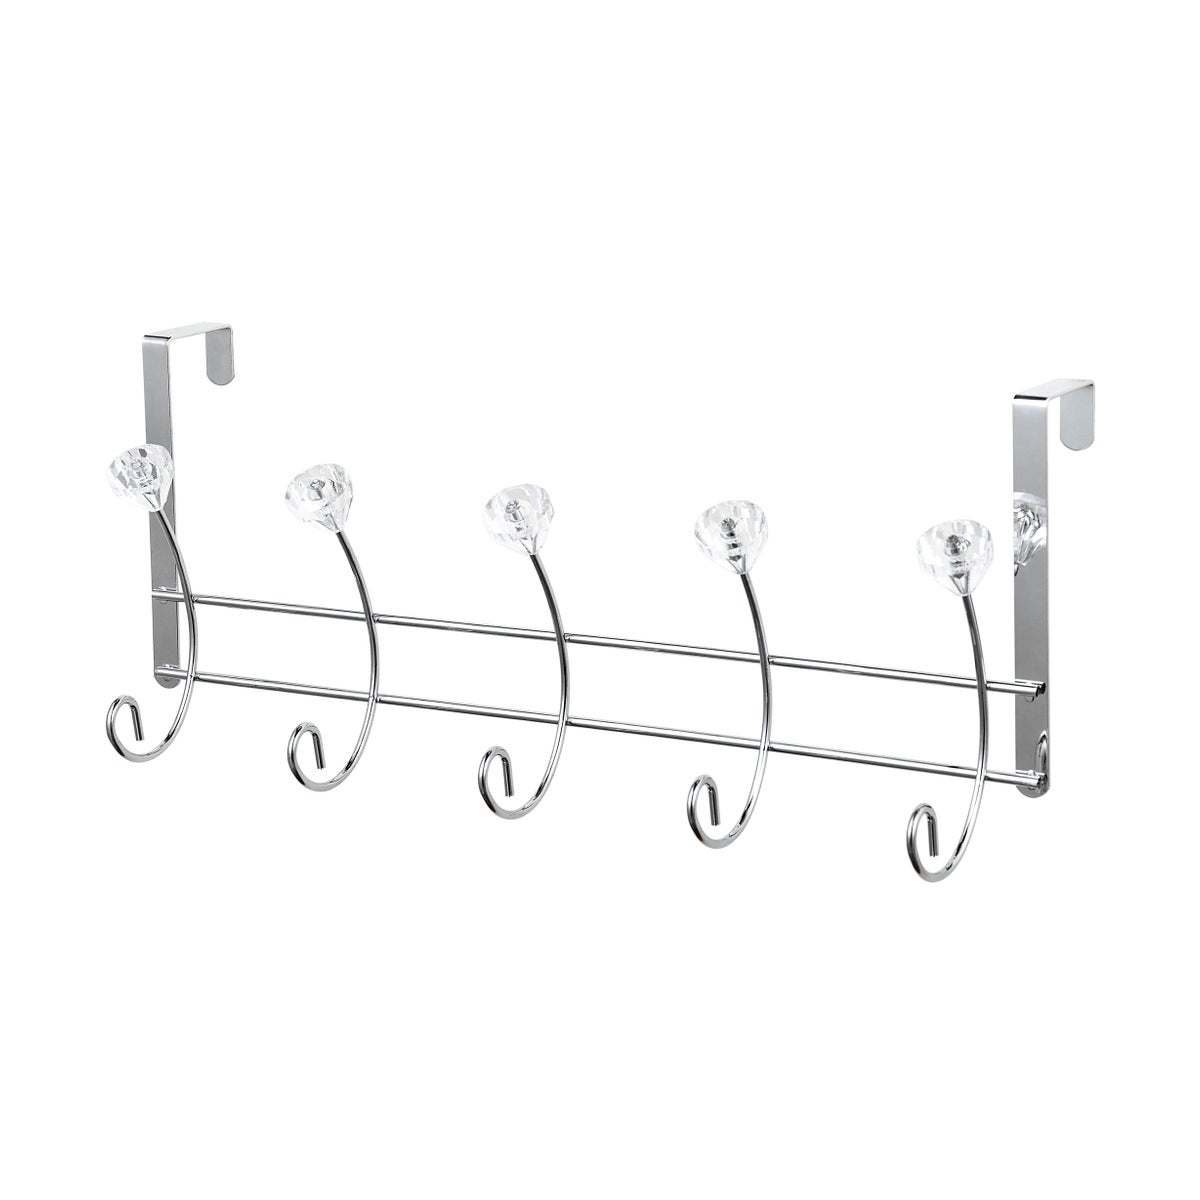 Chrome - Over-the-Door 10 Hook Rack with 5 Crystal Knobs (12)